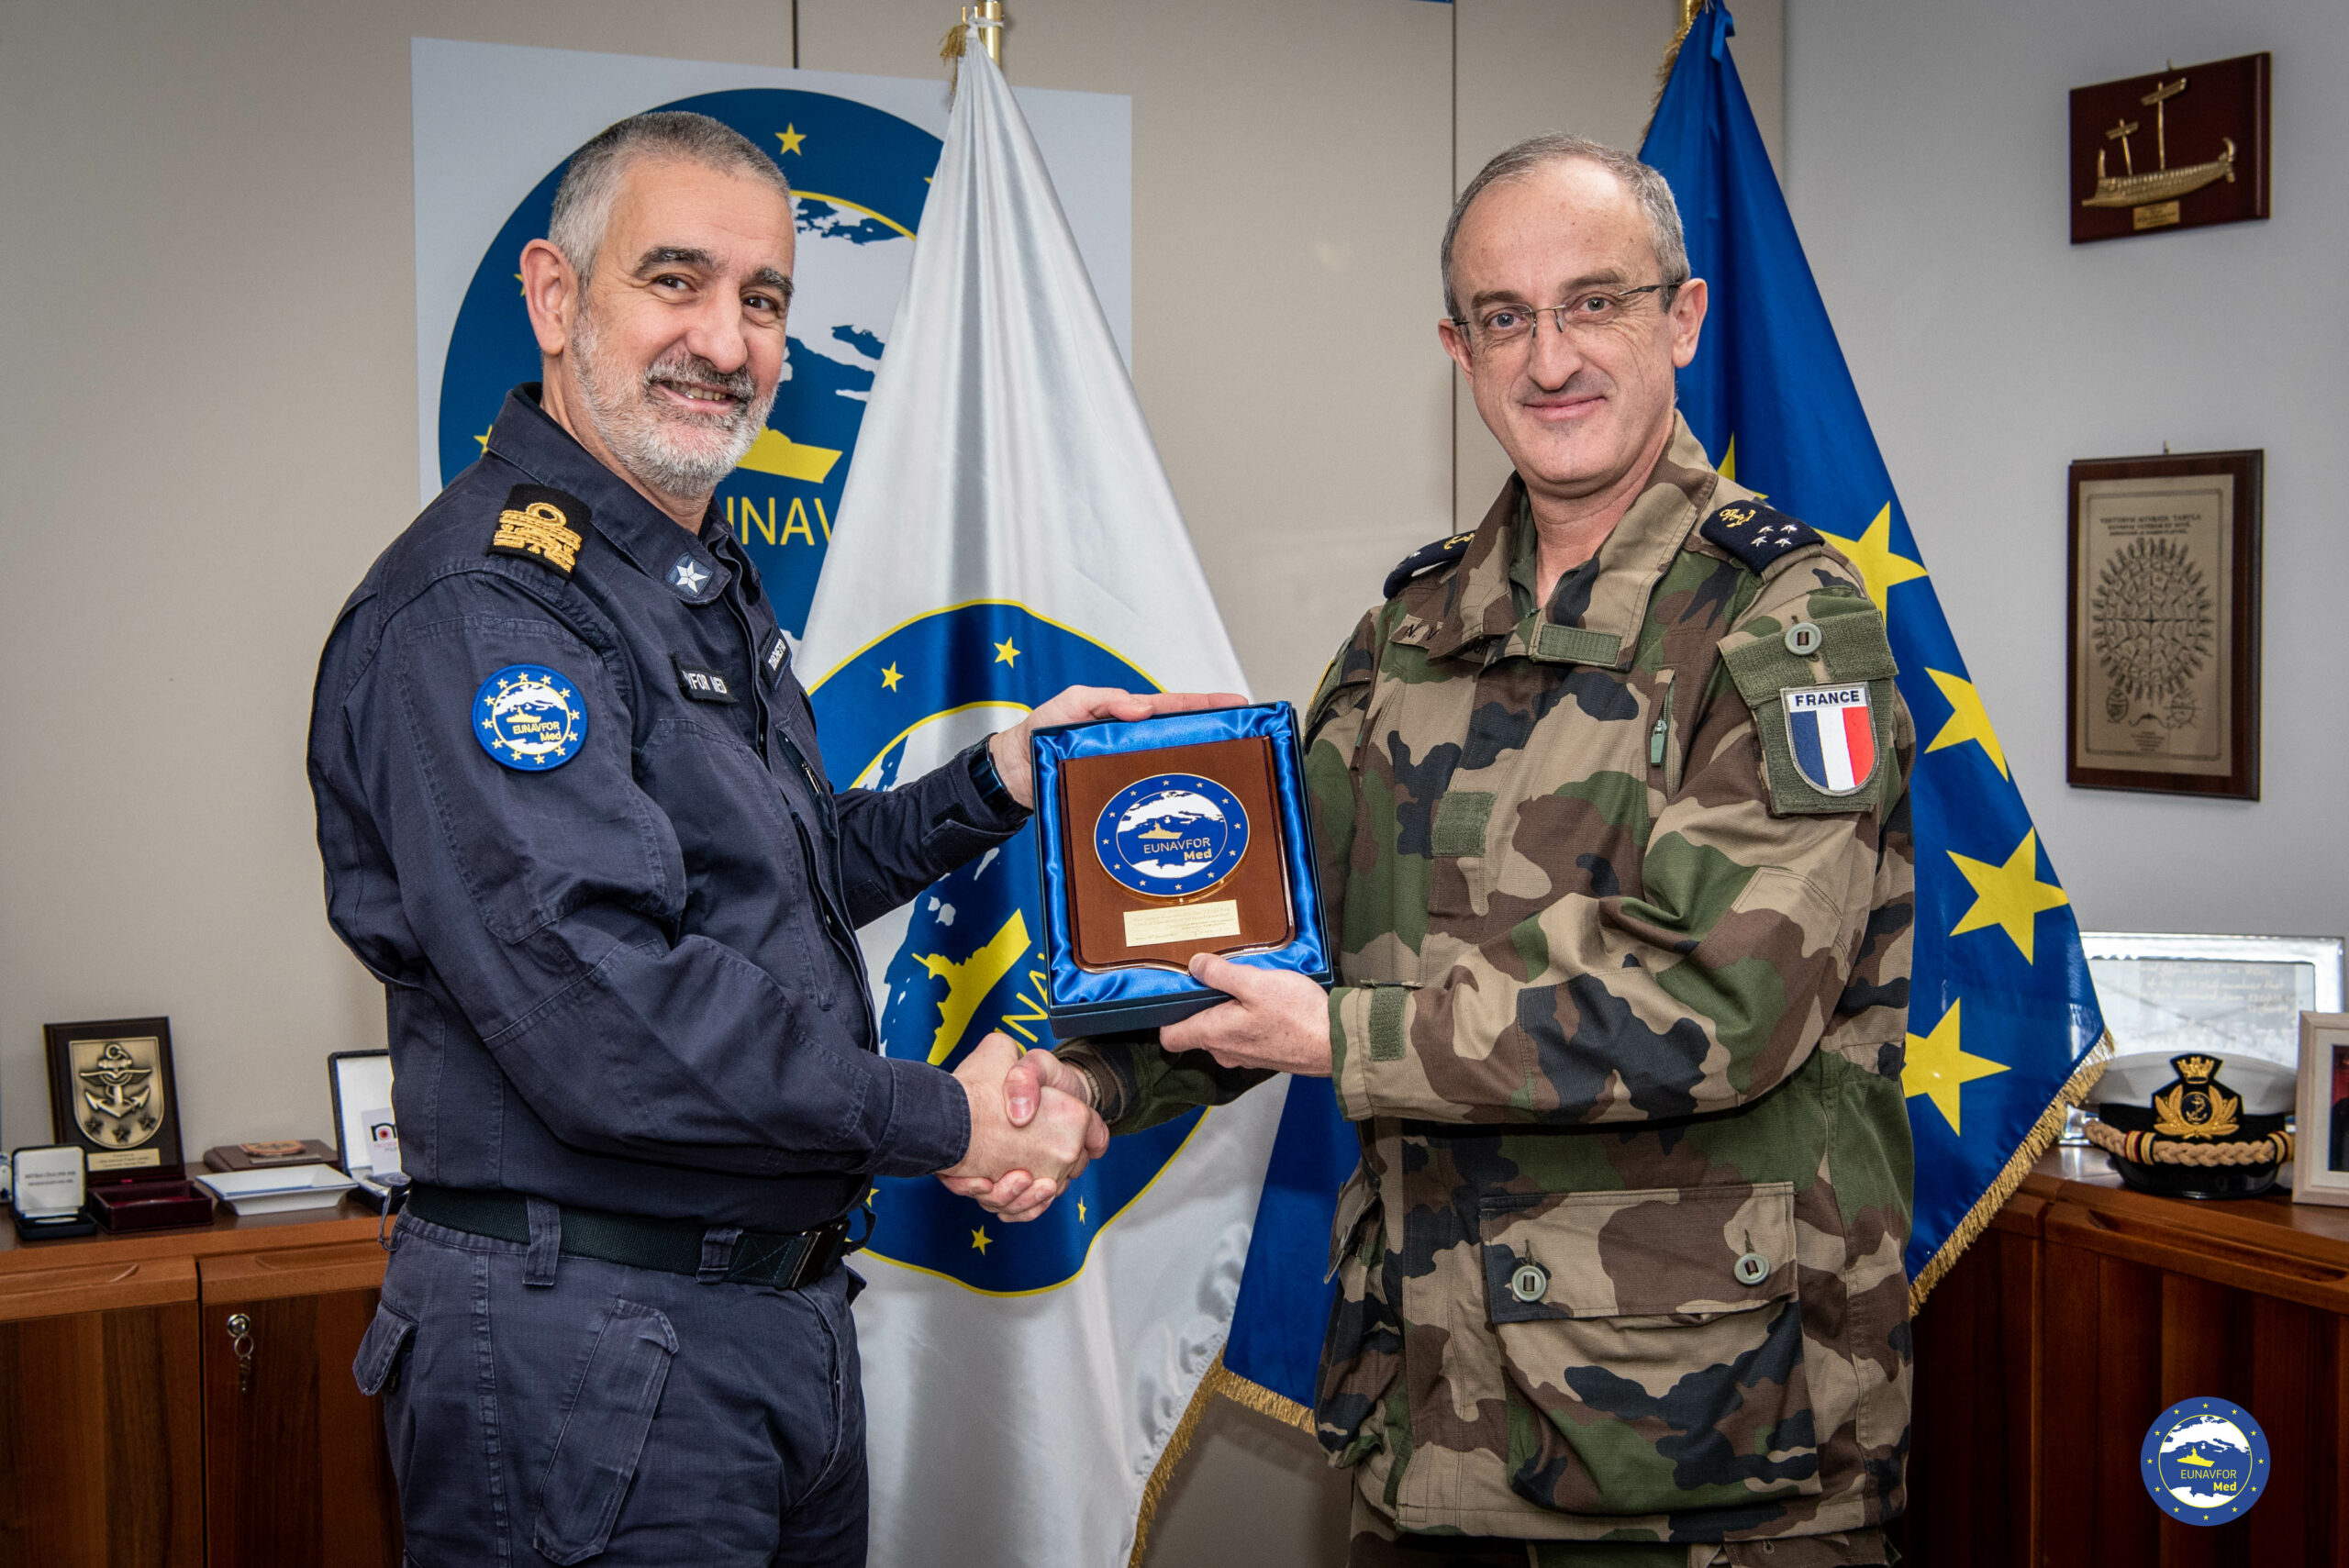 Chief of Operations of the French Joint Staff visited IRINI OHQ